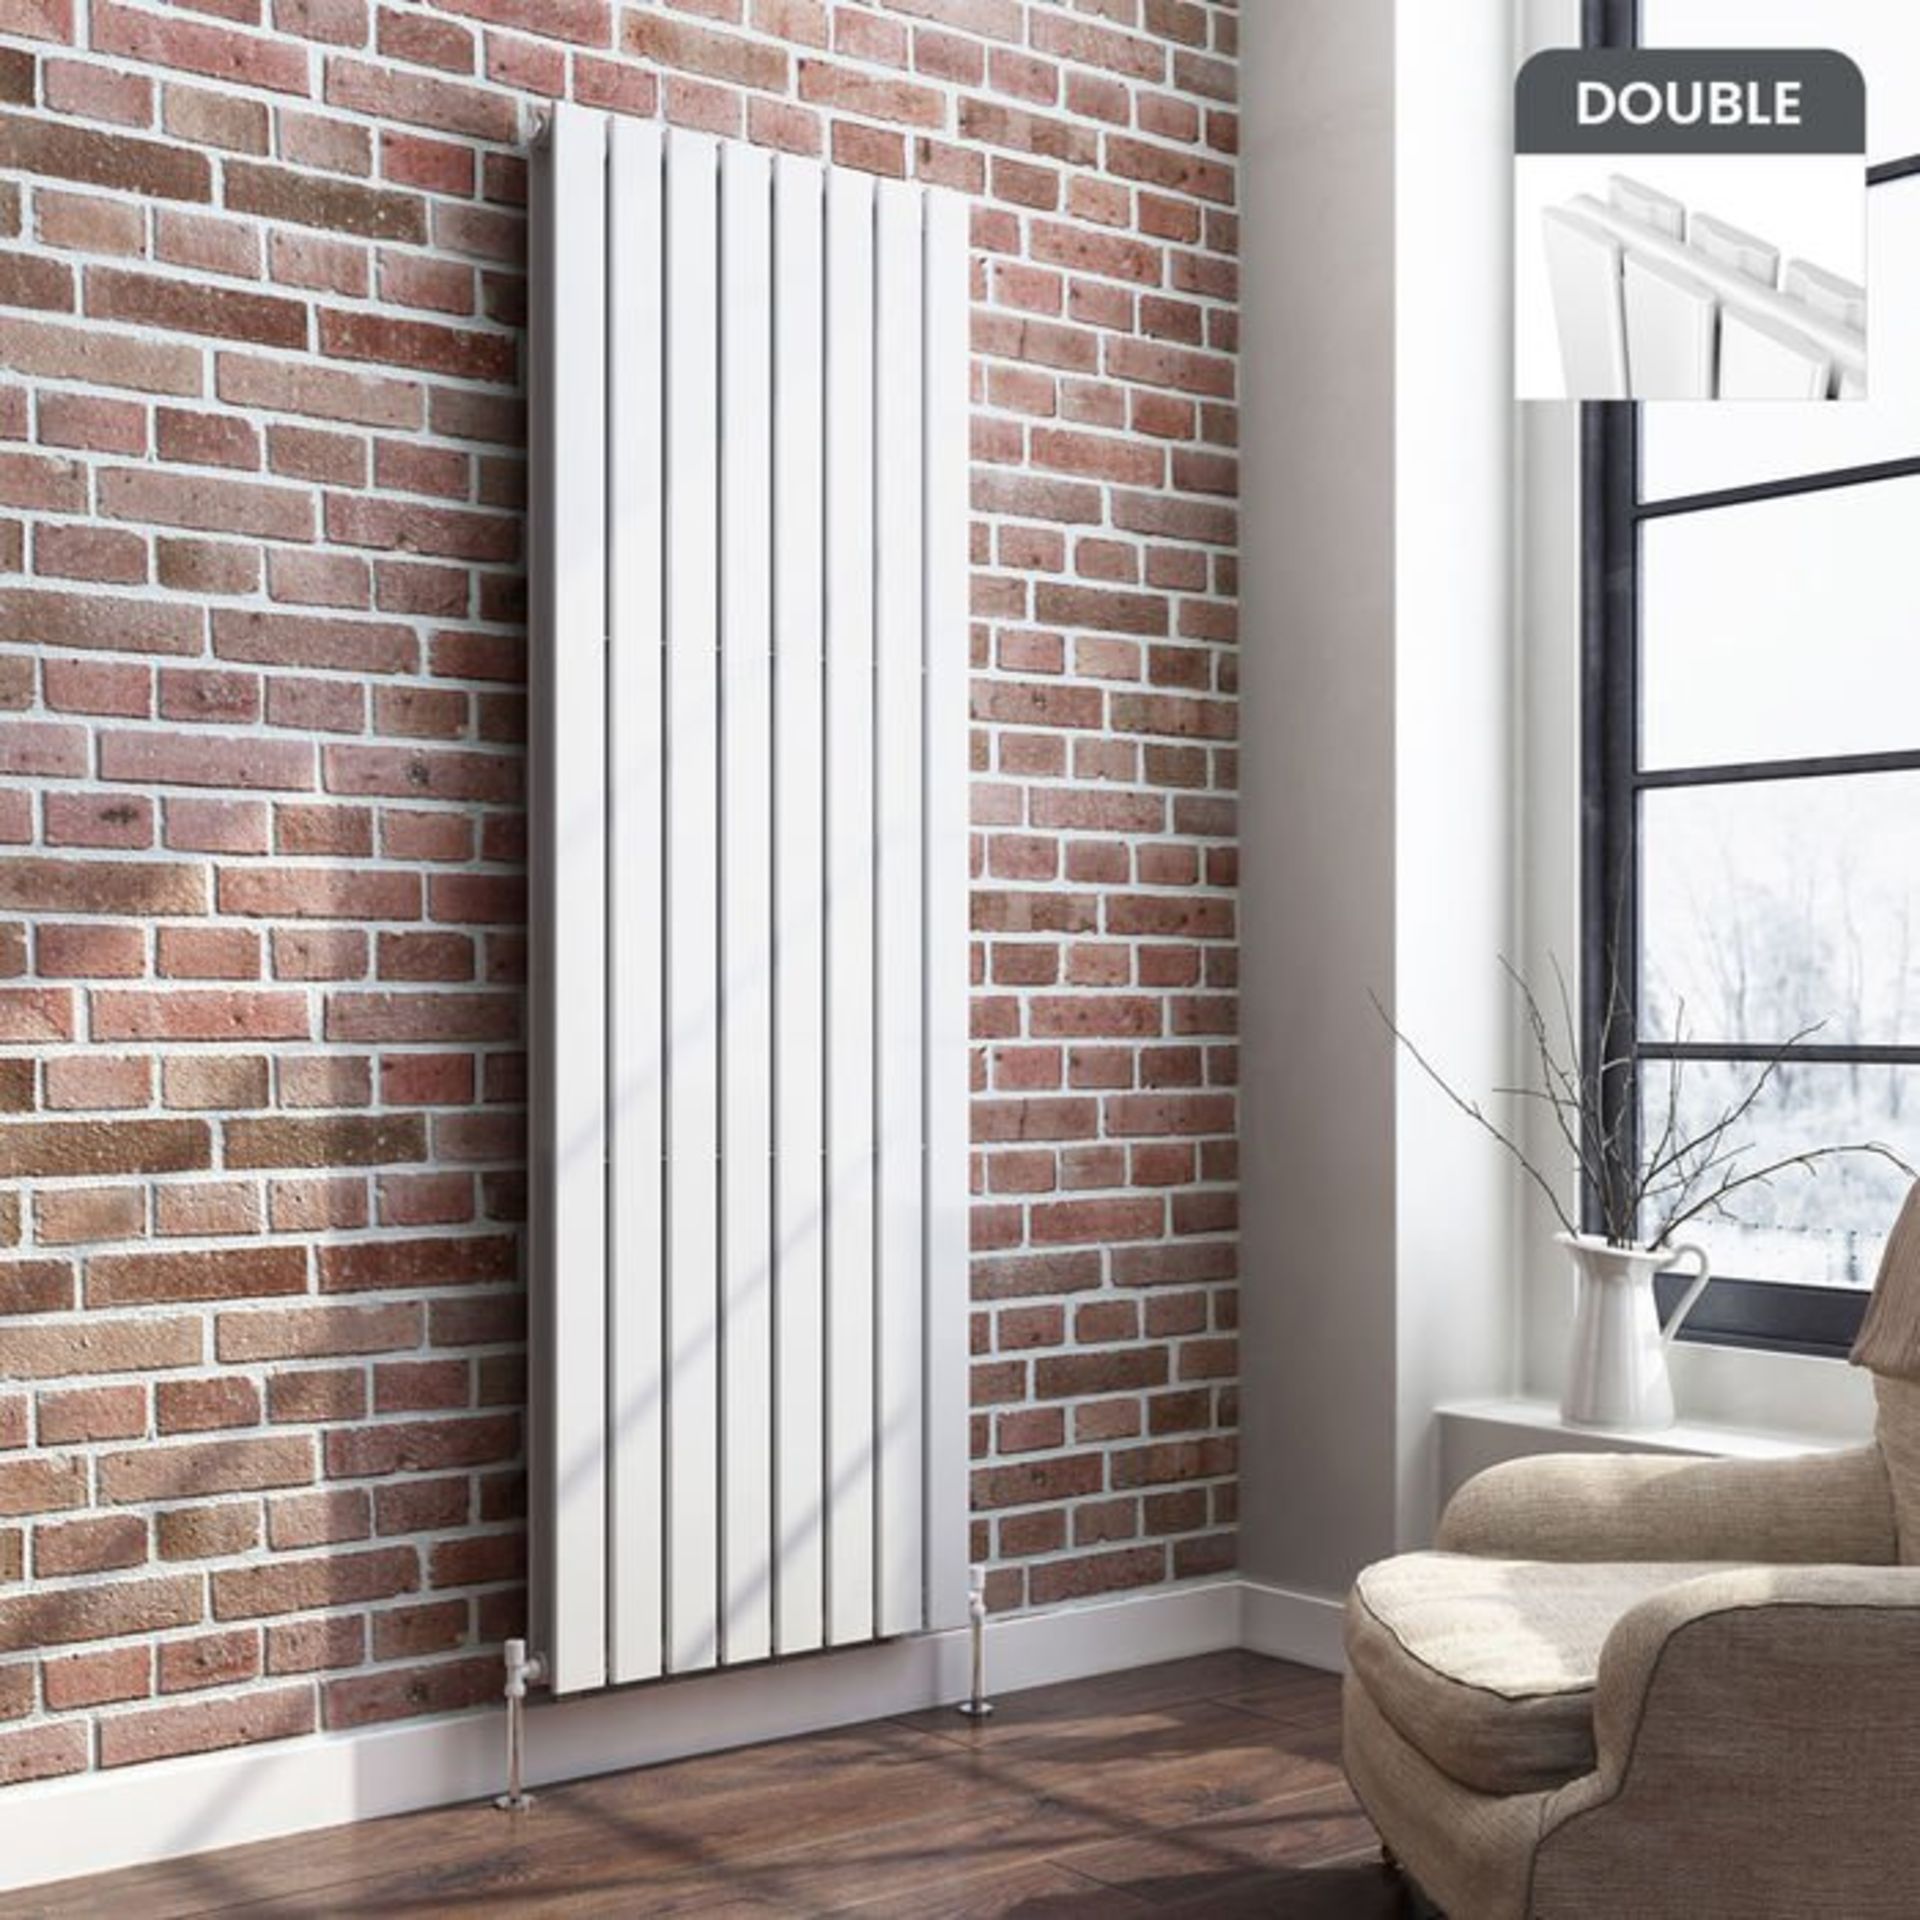 (A93) 1800x608mm Gloss White Double Flat Panel Vertical Radiator - Premium. RRP £599.99.. Low carbon